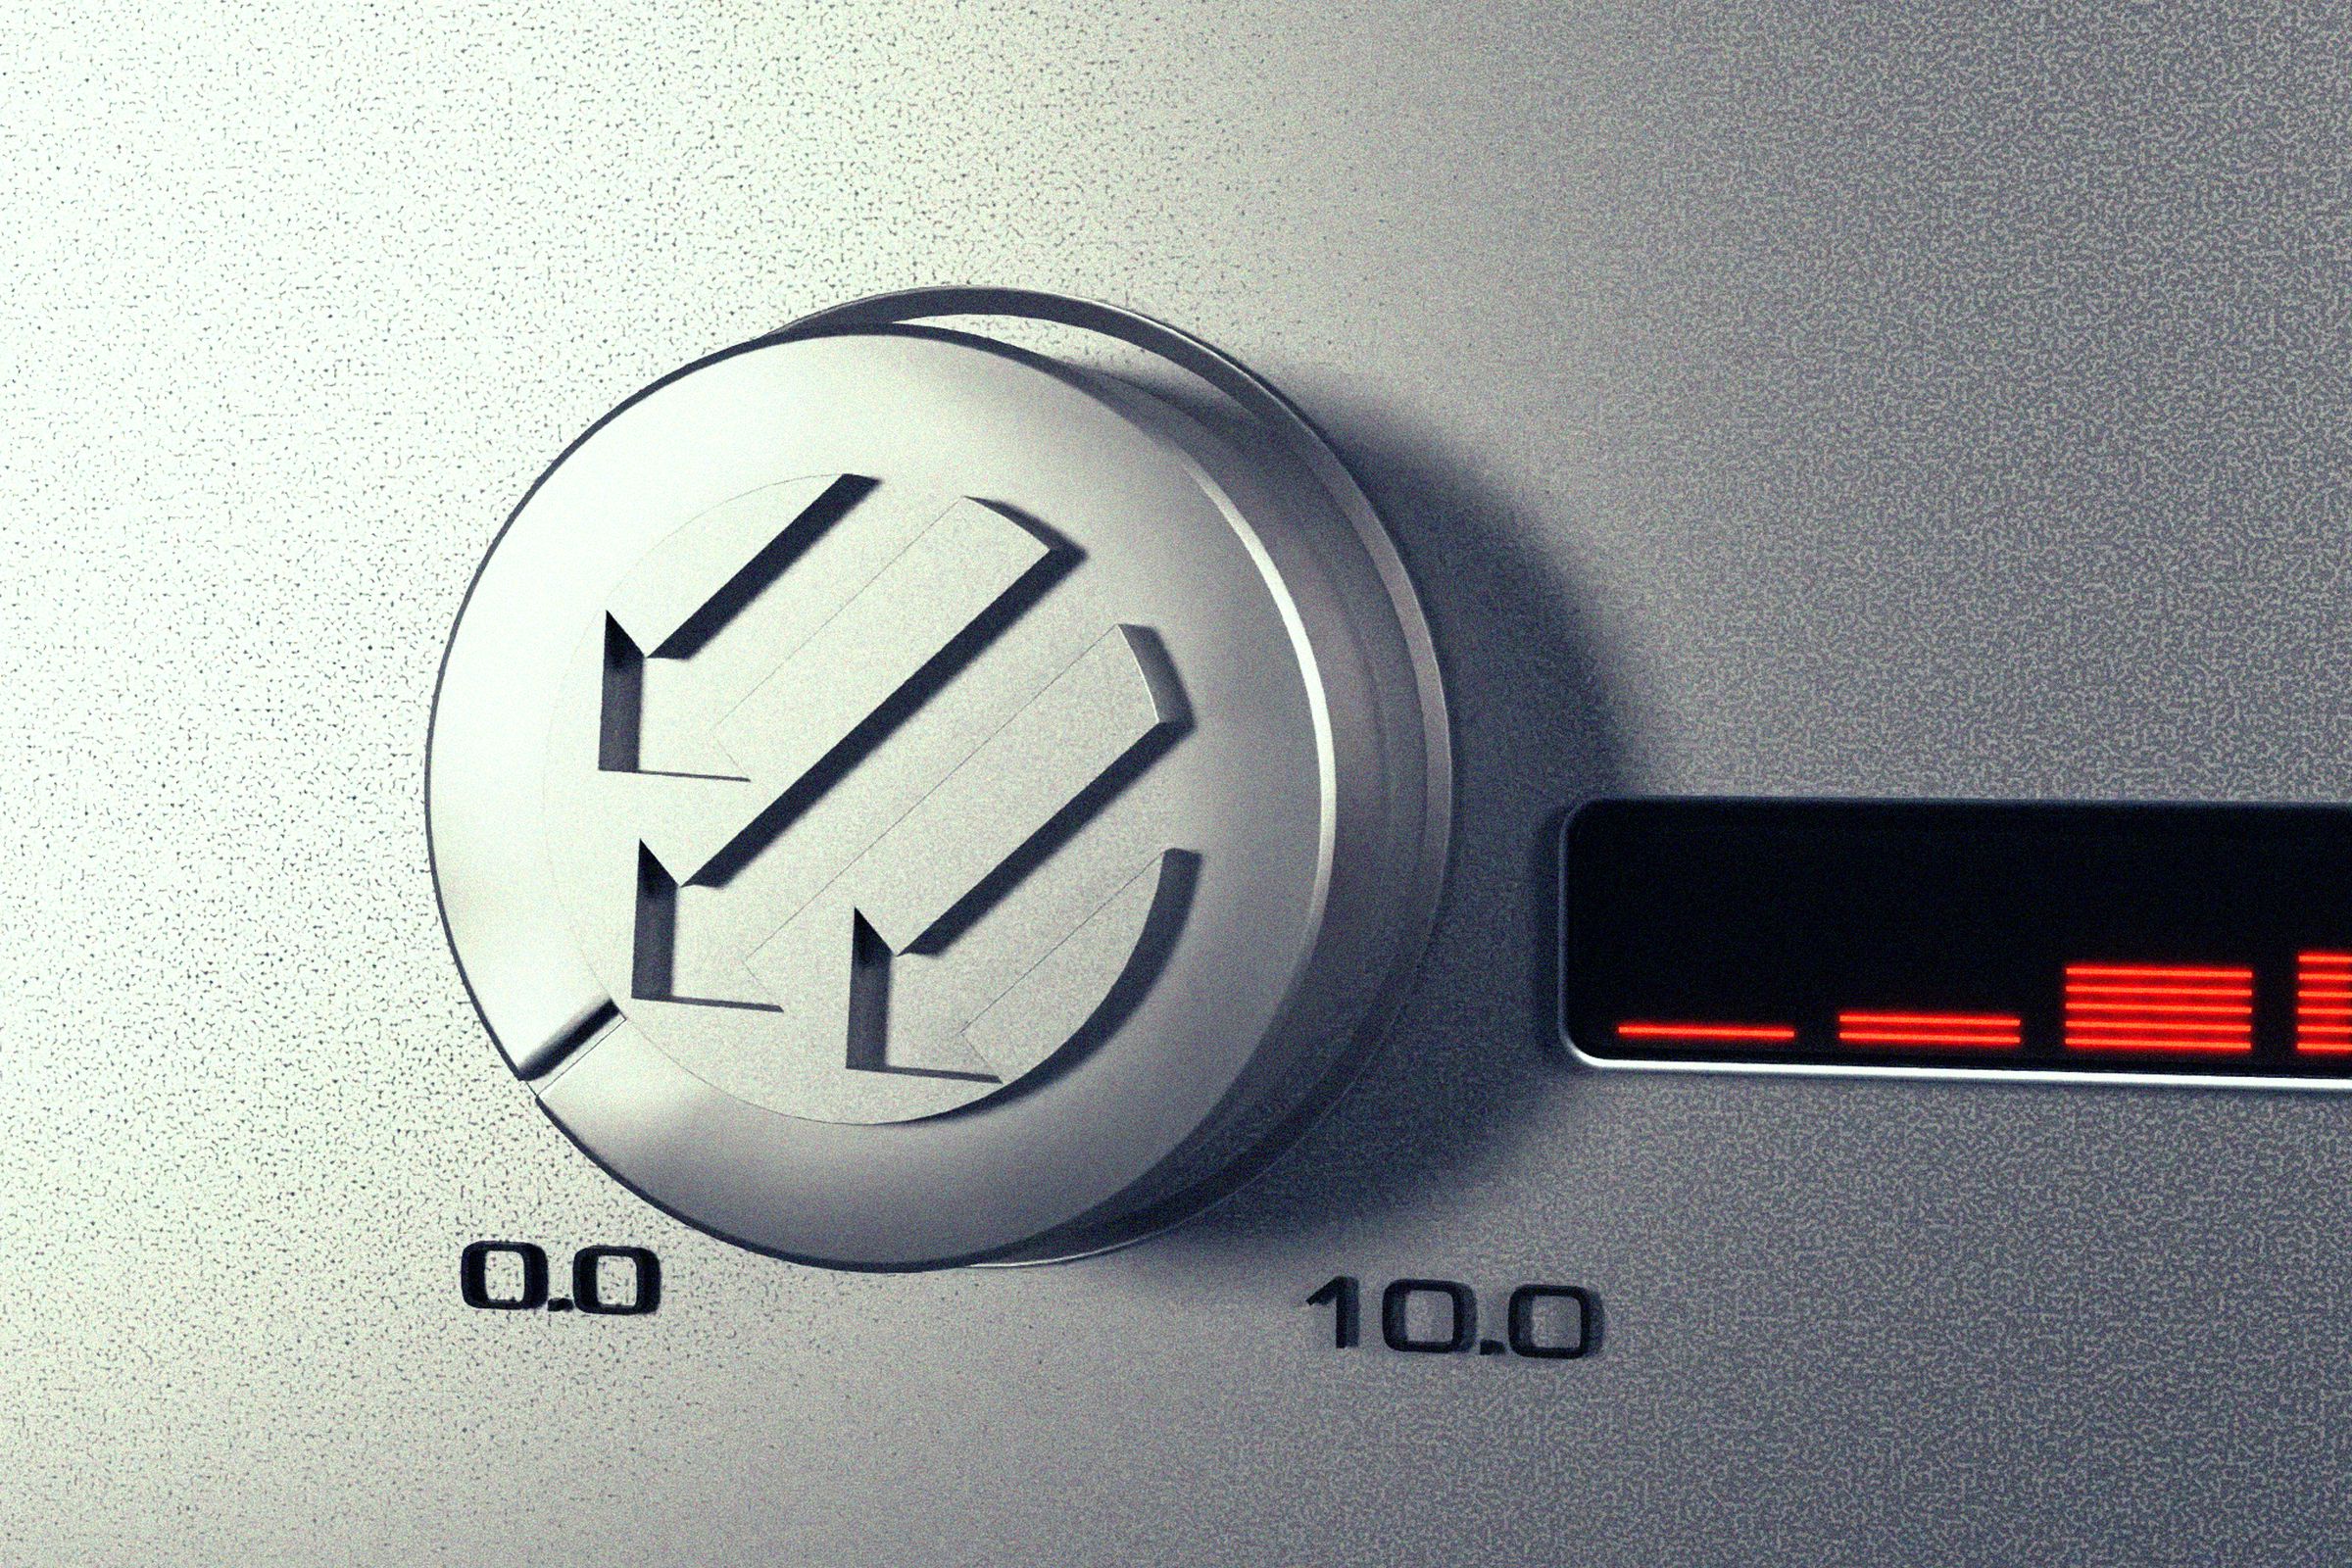 3D illustration of a volume knob with the Pitchfork logo being turned down.